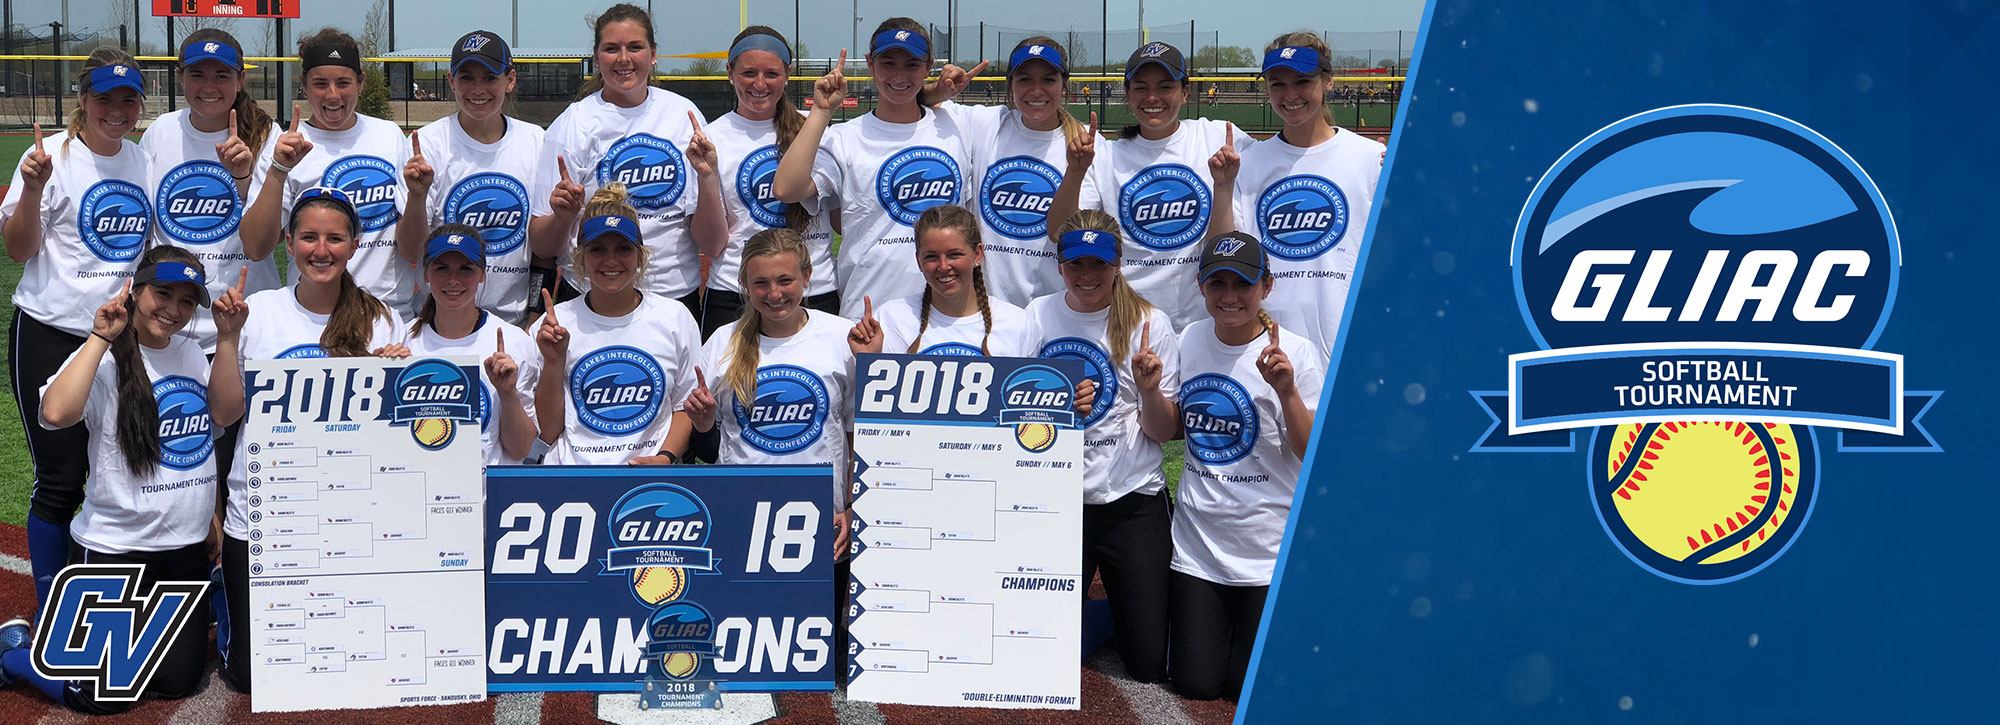 Grand Valley State Wins 2018 GLIAC Softball Tournament Title with Dramatic 11th Inning Victory